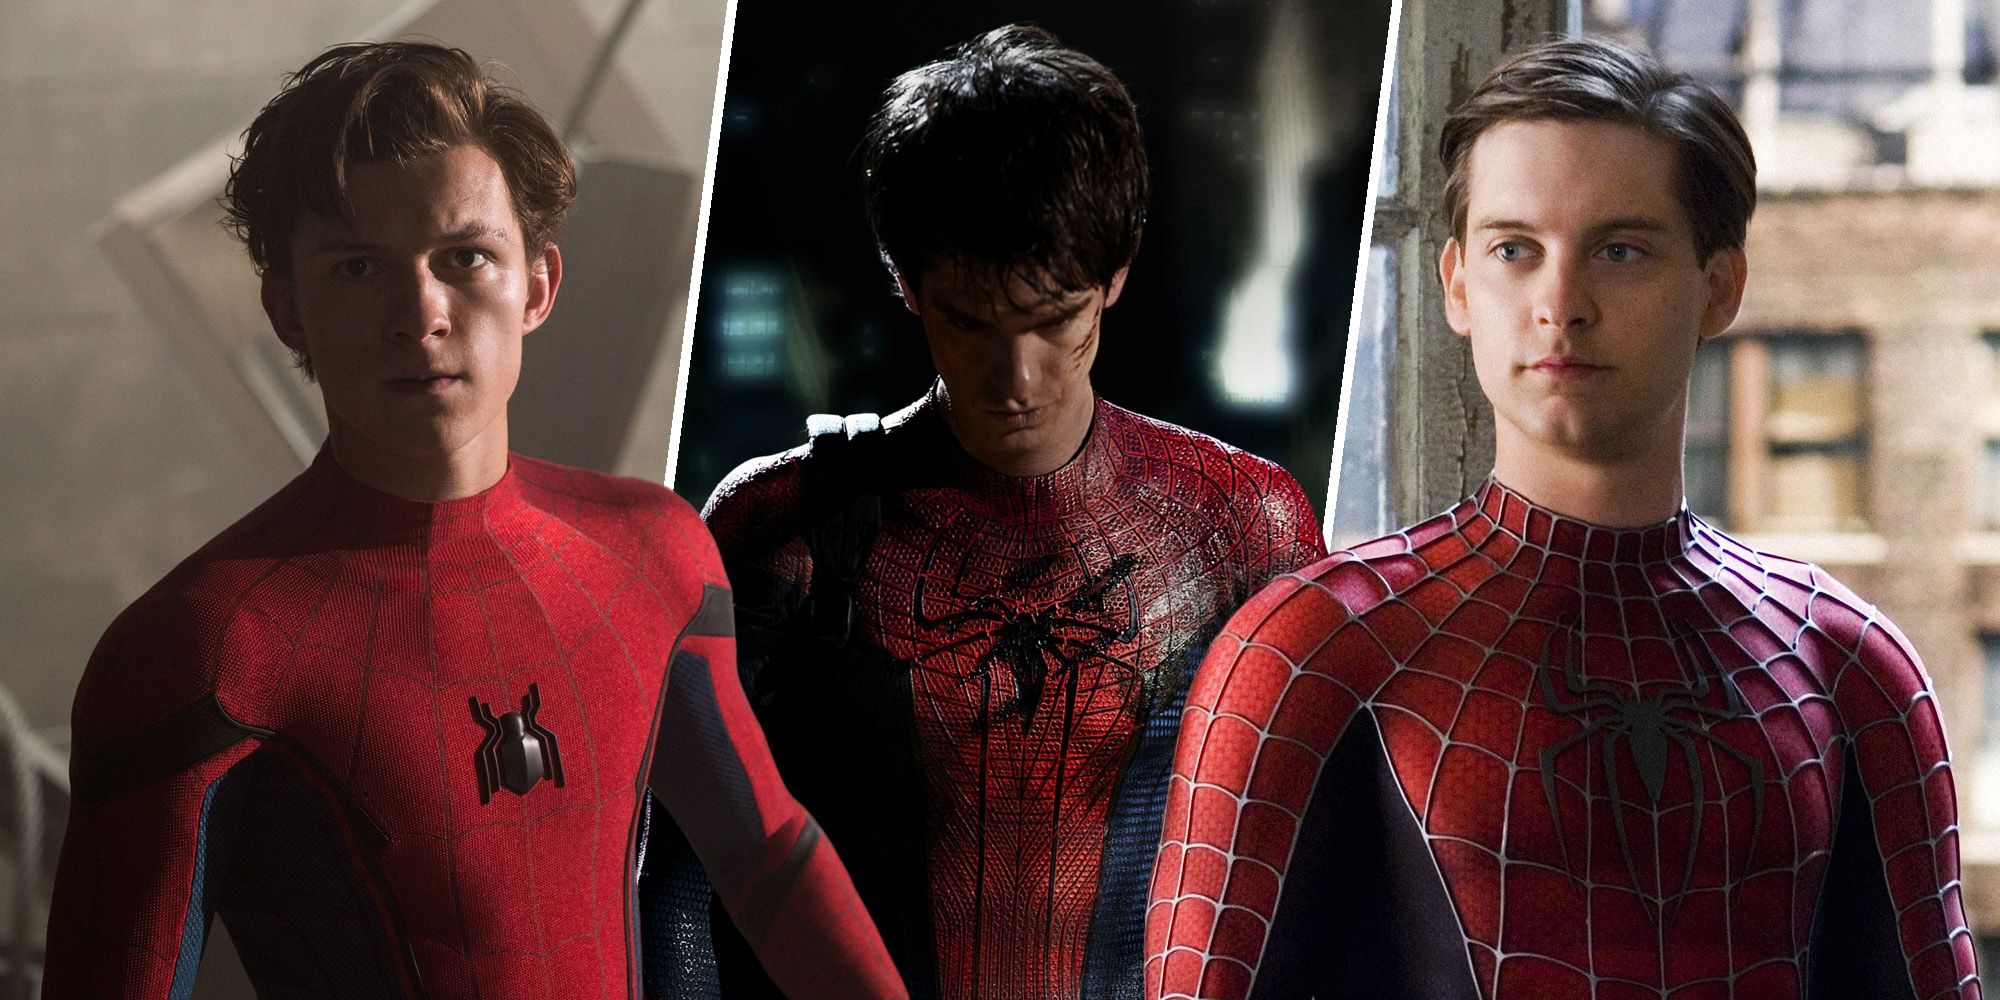 The 10 Best Spider-Man Actors of All Time, Ranked